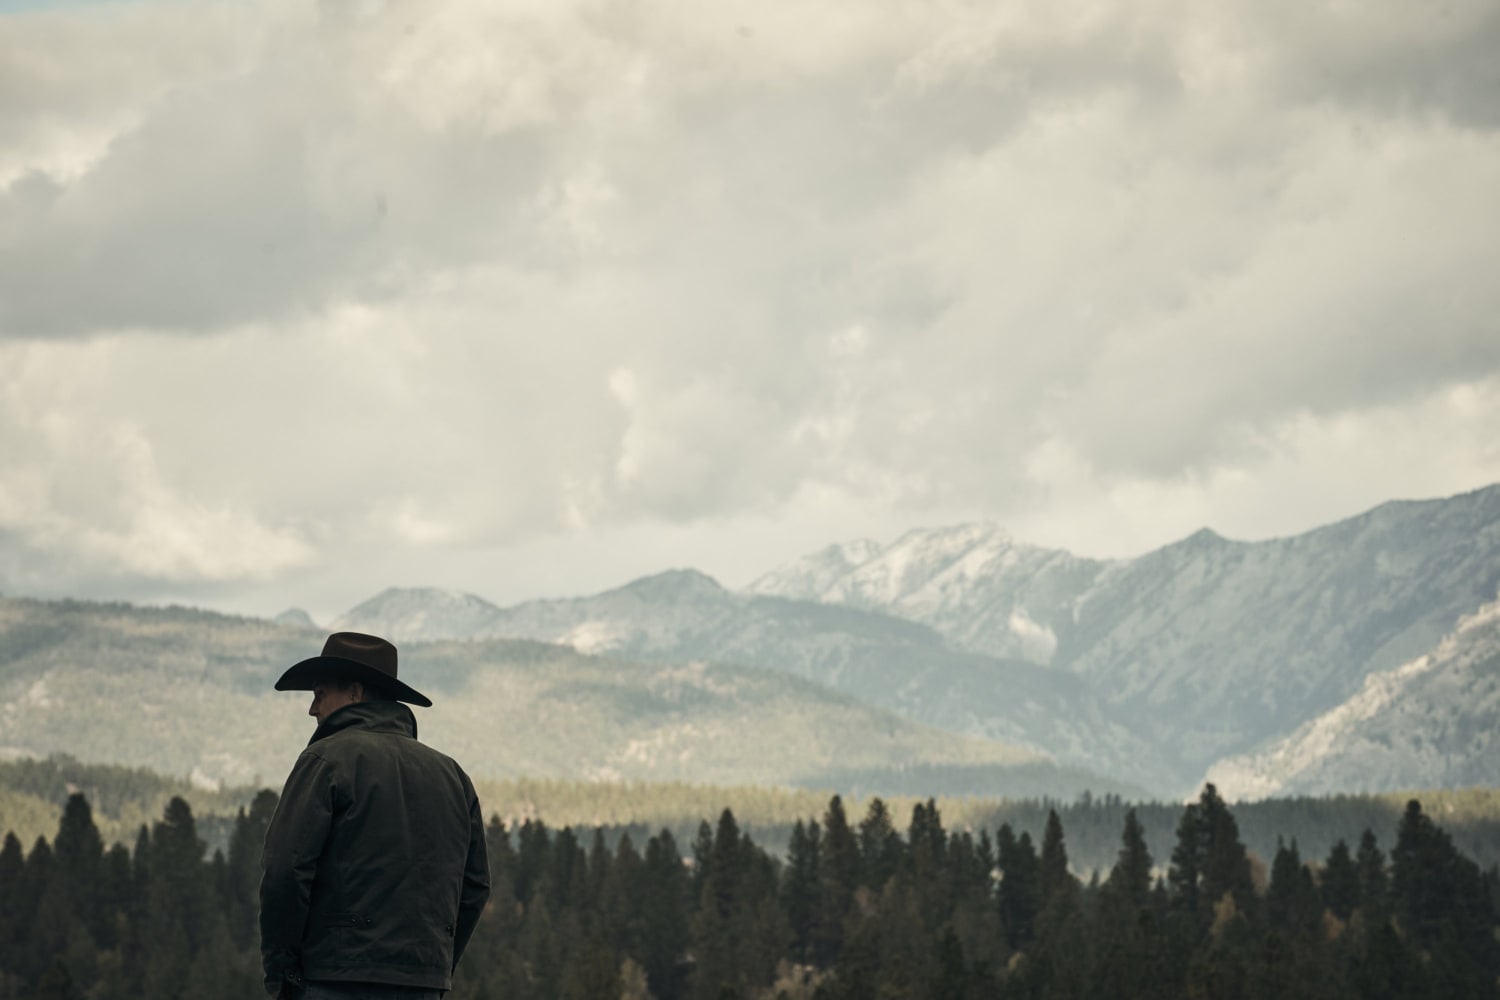 1883' is wrapping its first season, but the 'Yellowstone' universe ...